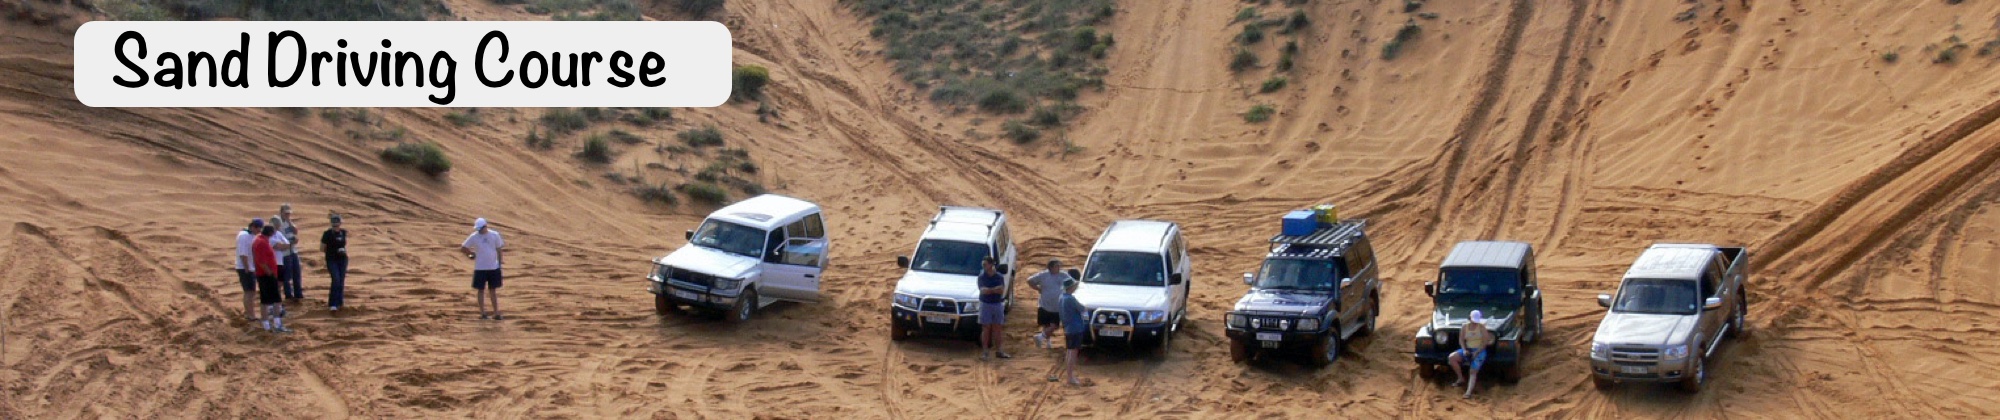 Drivers and vehicles on the sand driving course.